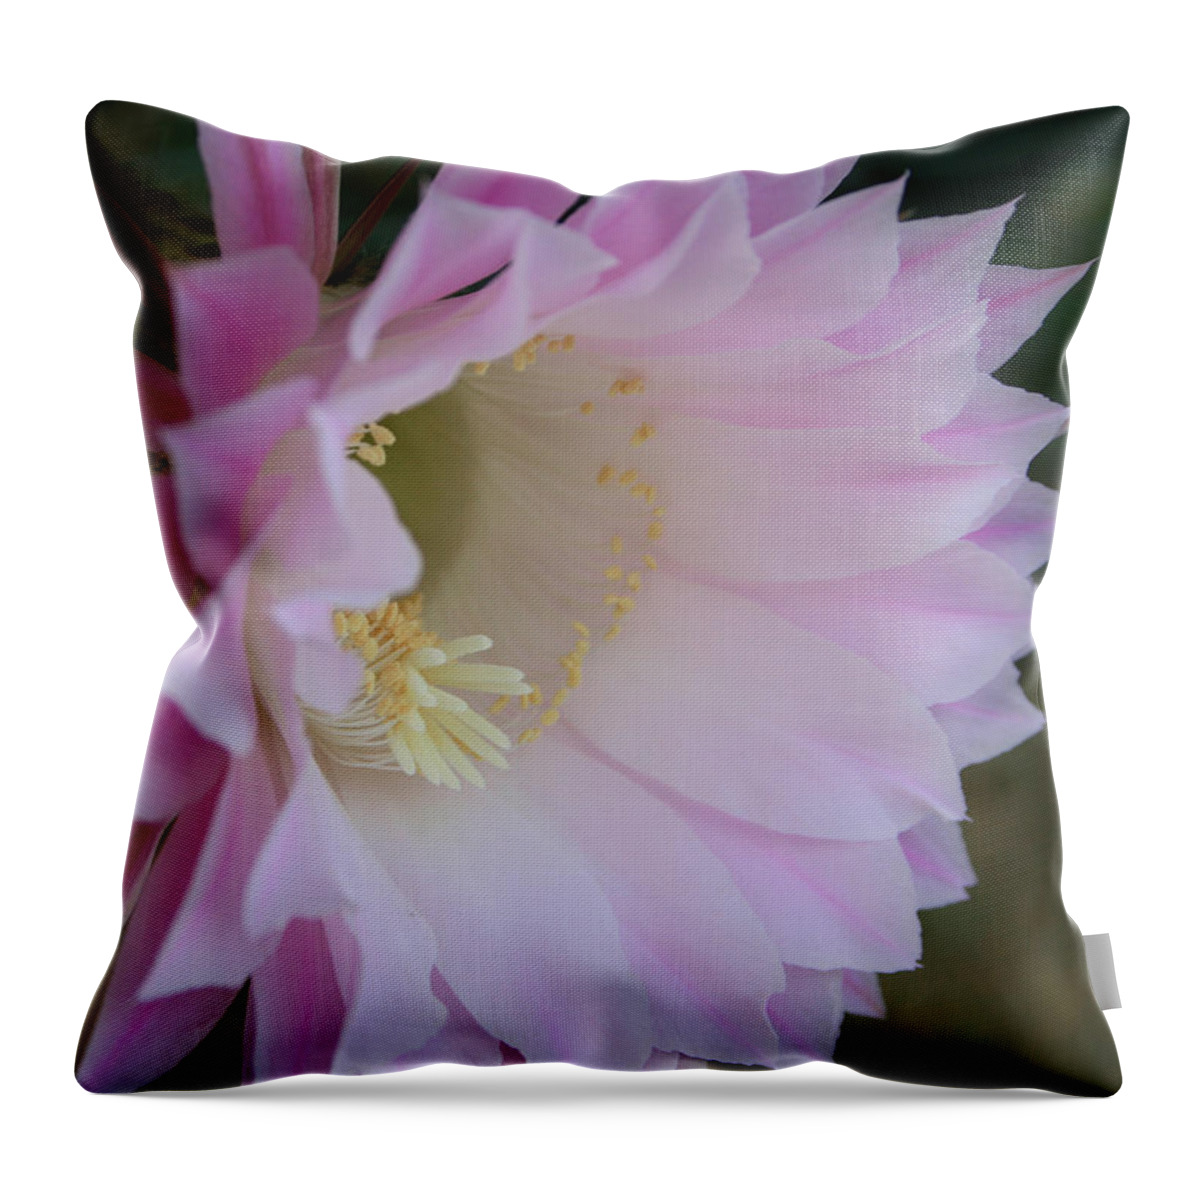 Cactus Easter Lily Bloom Throw Pillow featuring the painting Easter Lily Cactus East 2 by Marna Edwards Flavell